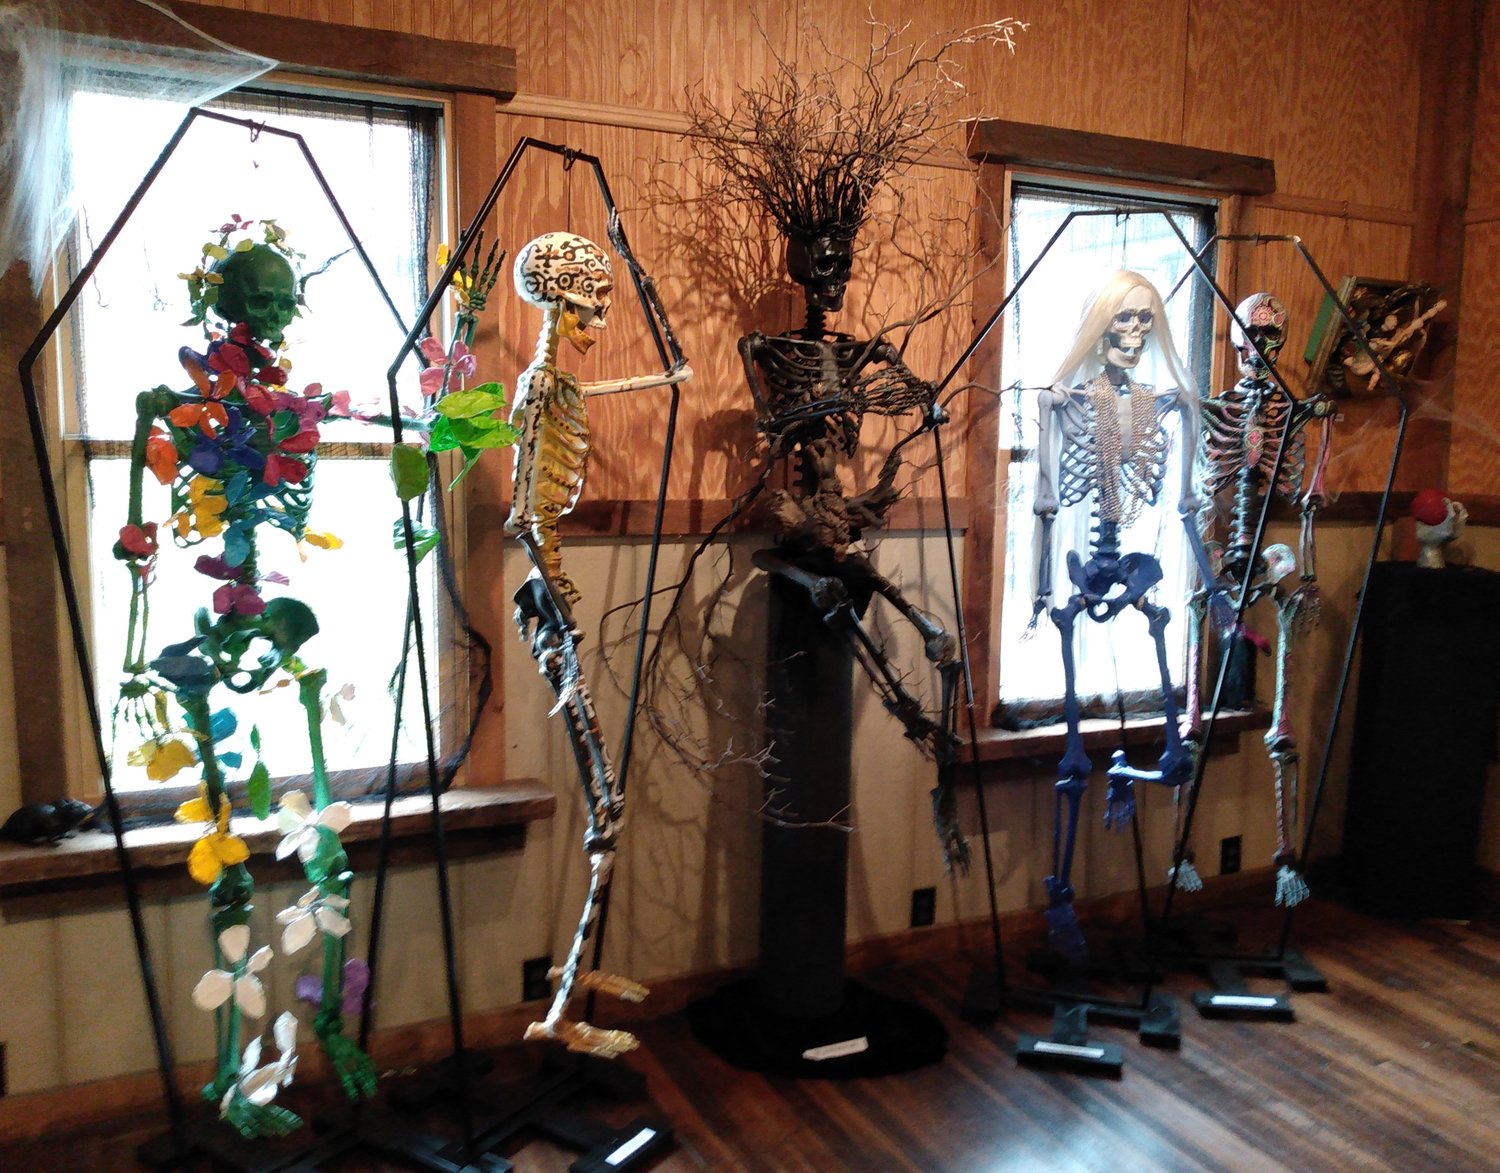 These skeletons being auctioned off are now hanging “Outa da Closet” as part of the Wayne County Arts Alliance’s “Haunted Mezzanine” exhibit.